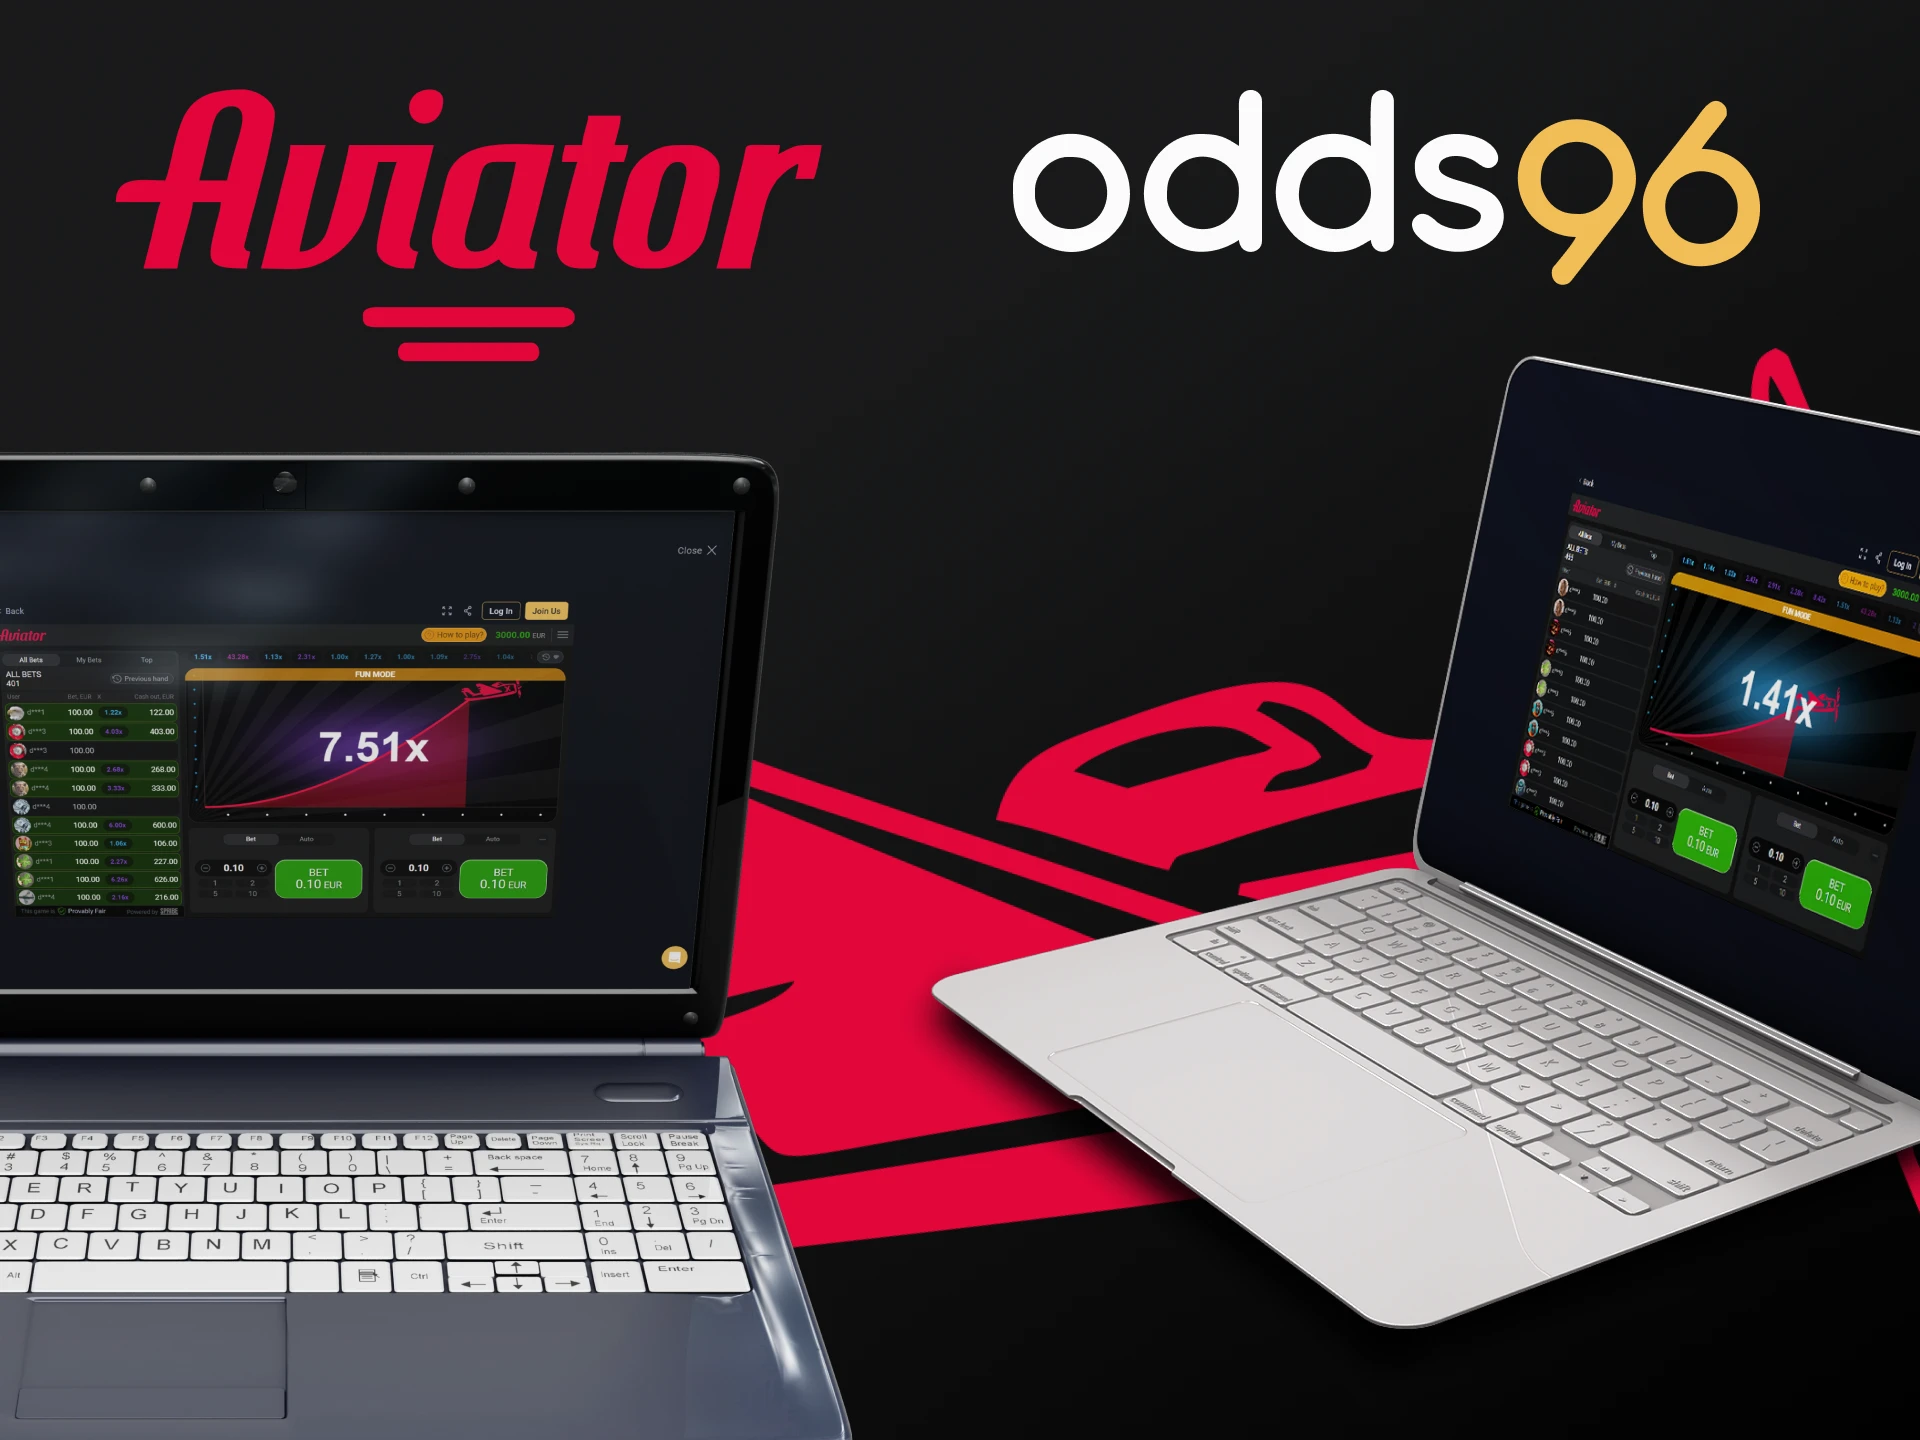 Find out which device is best for playing Aviator on Odds96.